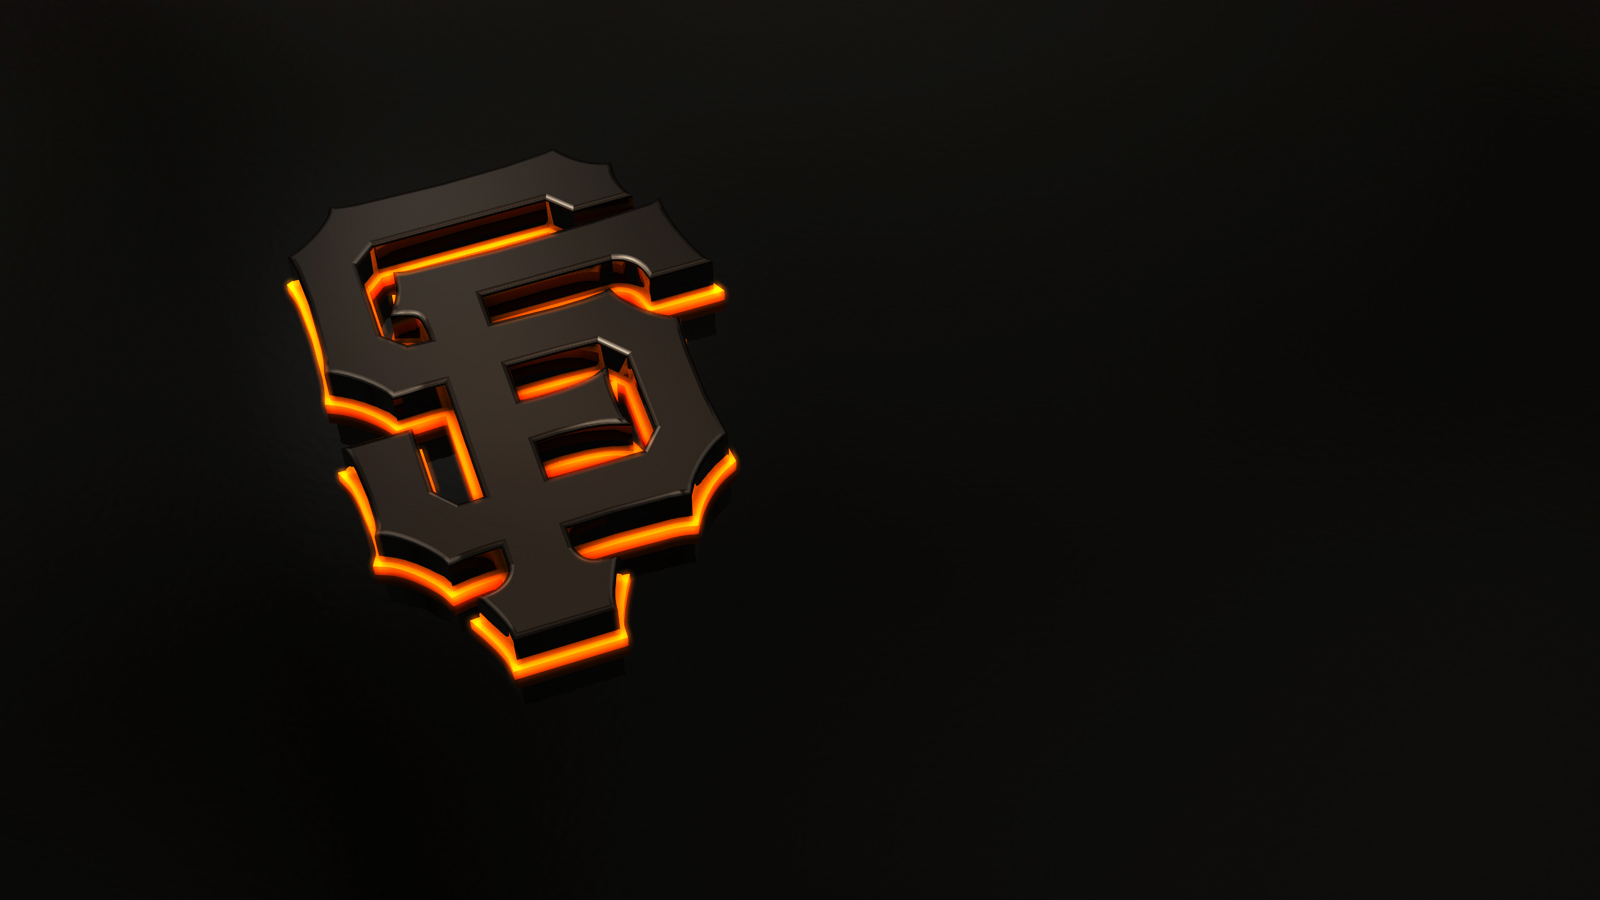 sf giants wallpaper sf giants wallpapers sf giants wallpapers 1600x900